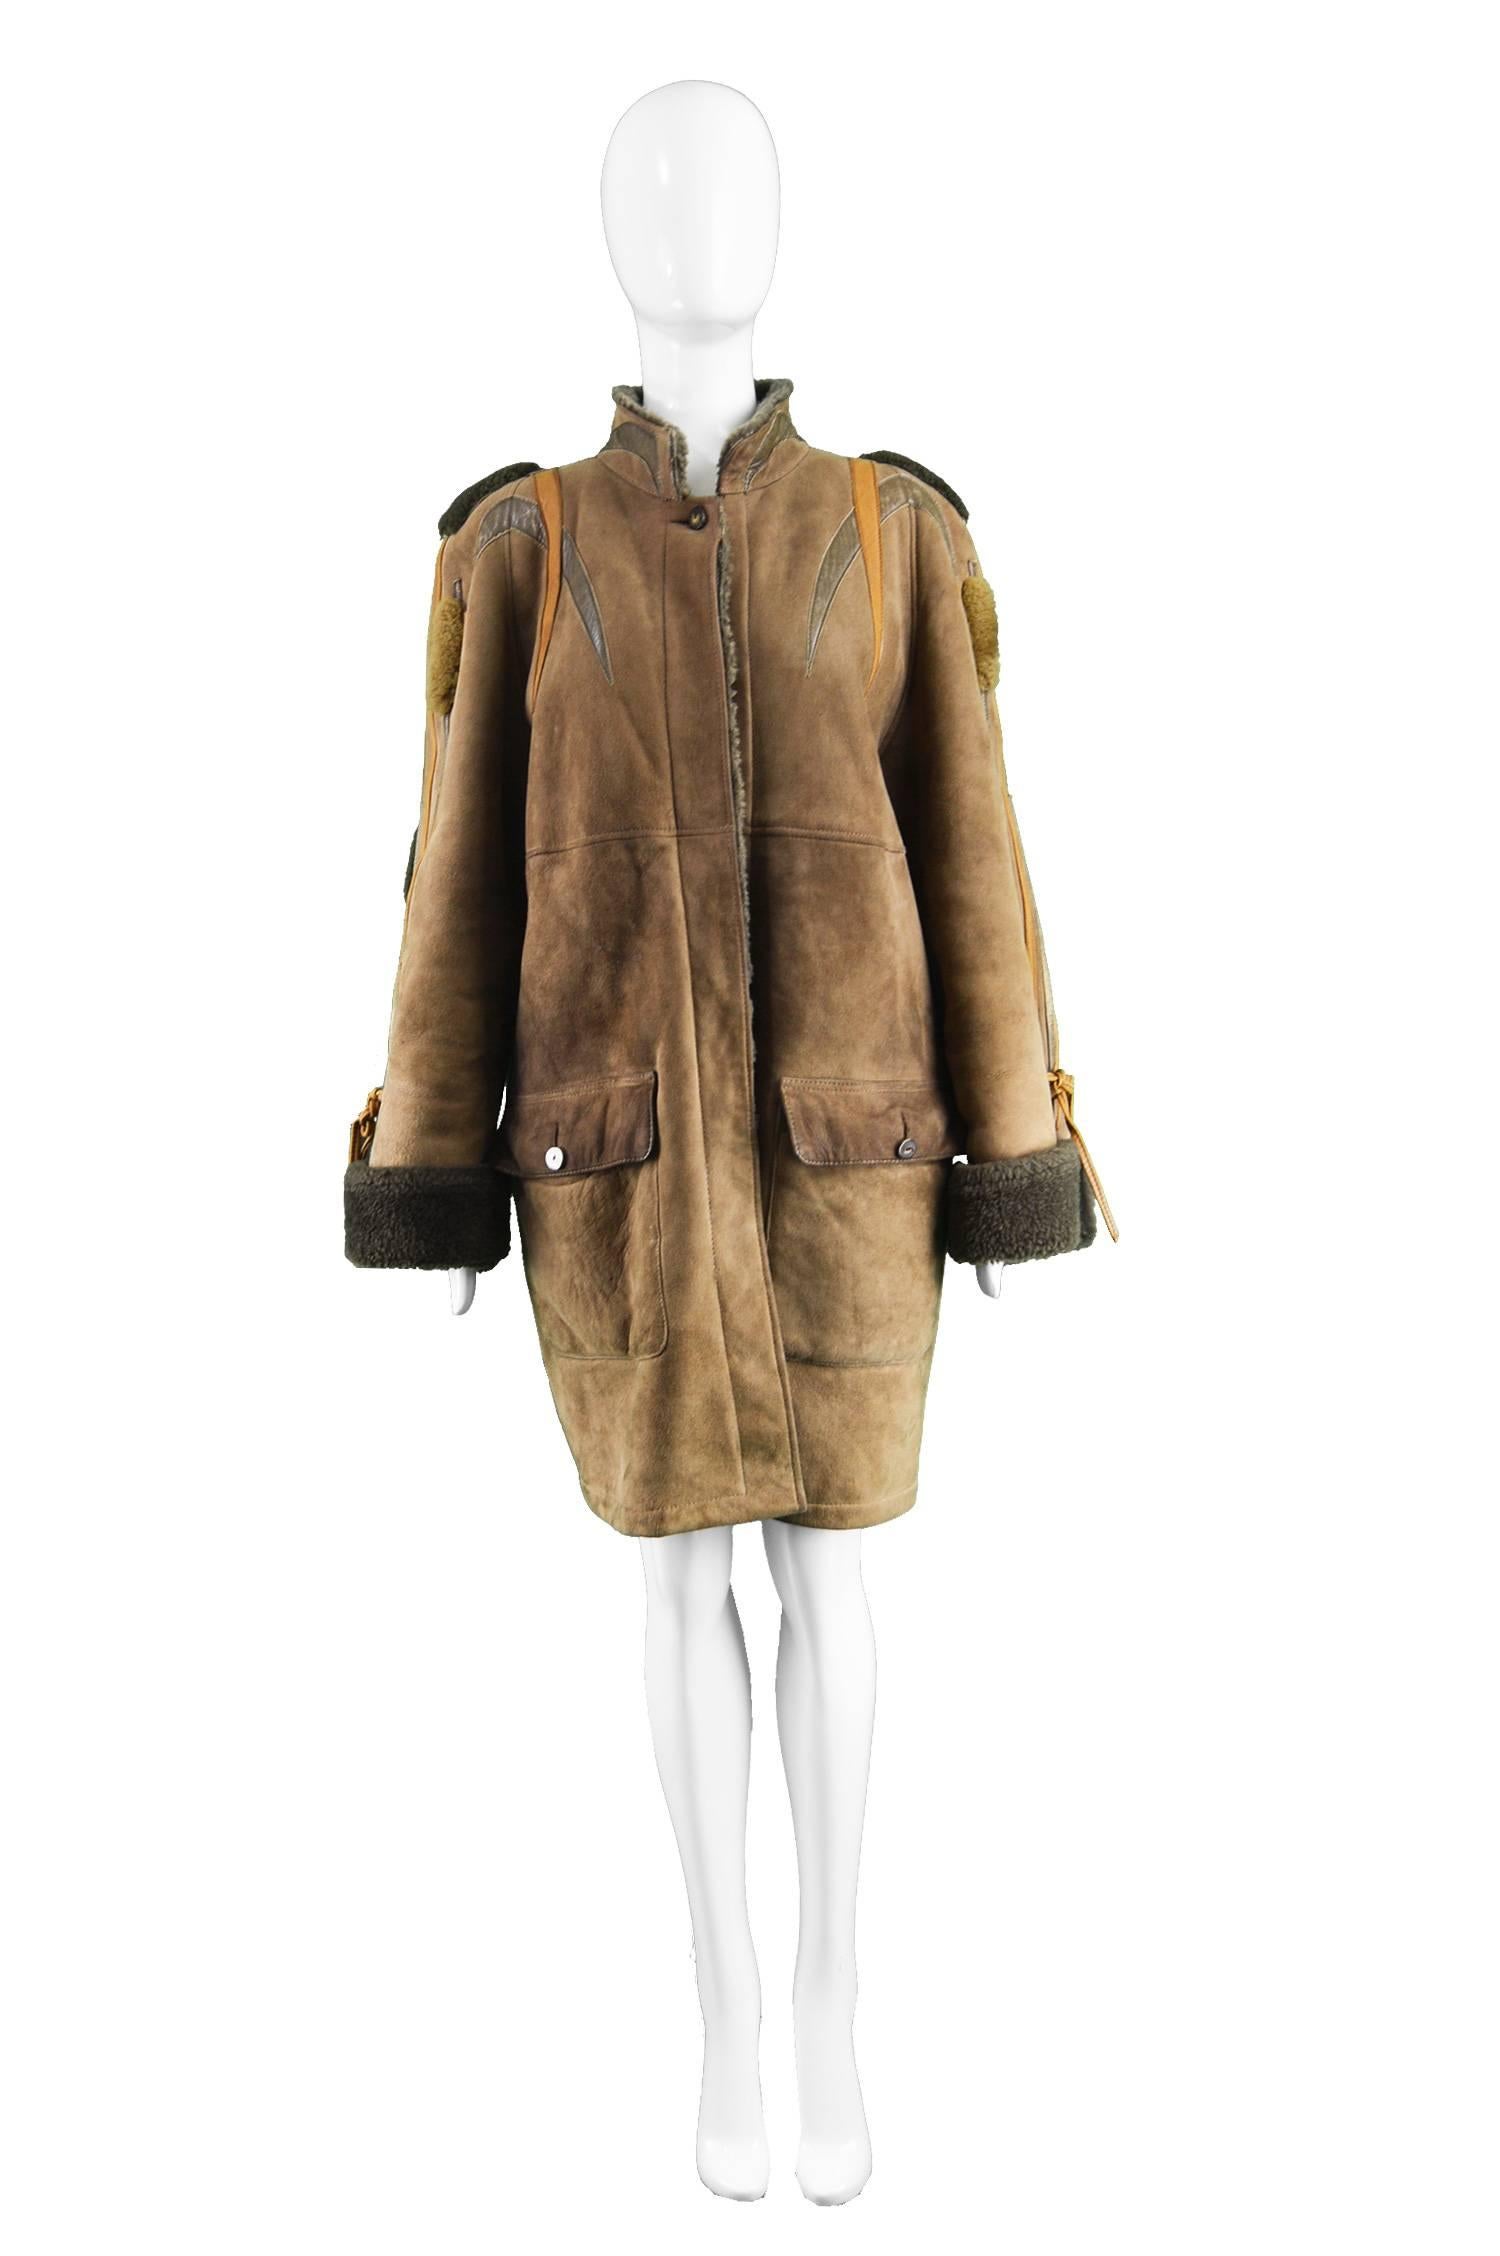 JC de Castelbajac Vintage Women's Oversized Suede Trim Sheep Skin Coat, 1980s

Estimated Size: Best suits a women's Medium with an intentional loose fit or a Large for a more fitted look. Please check measurements.
Chest - up to 46” / 117cm (has a